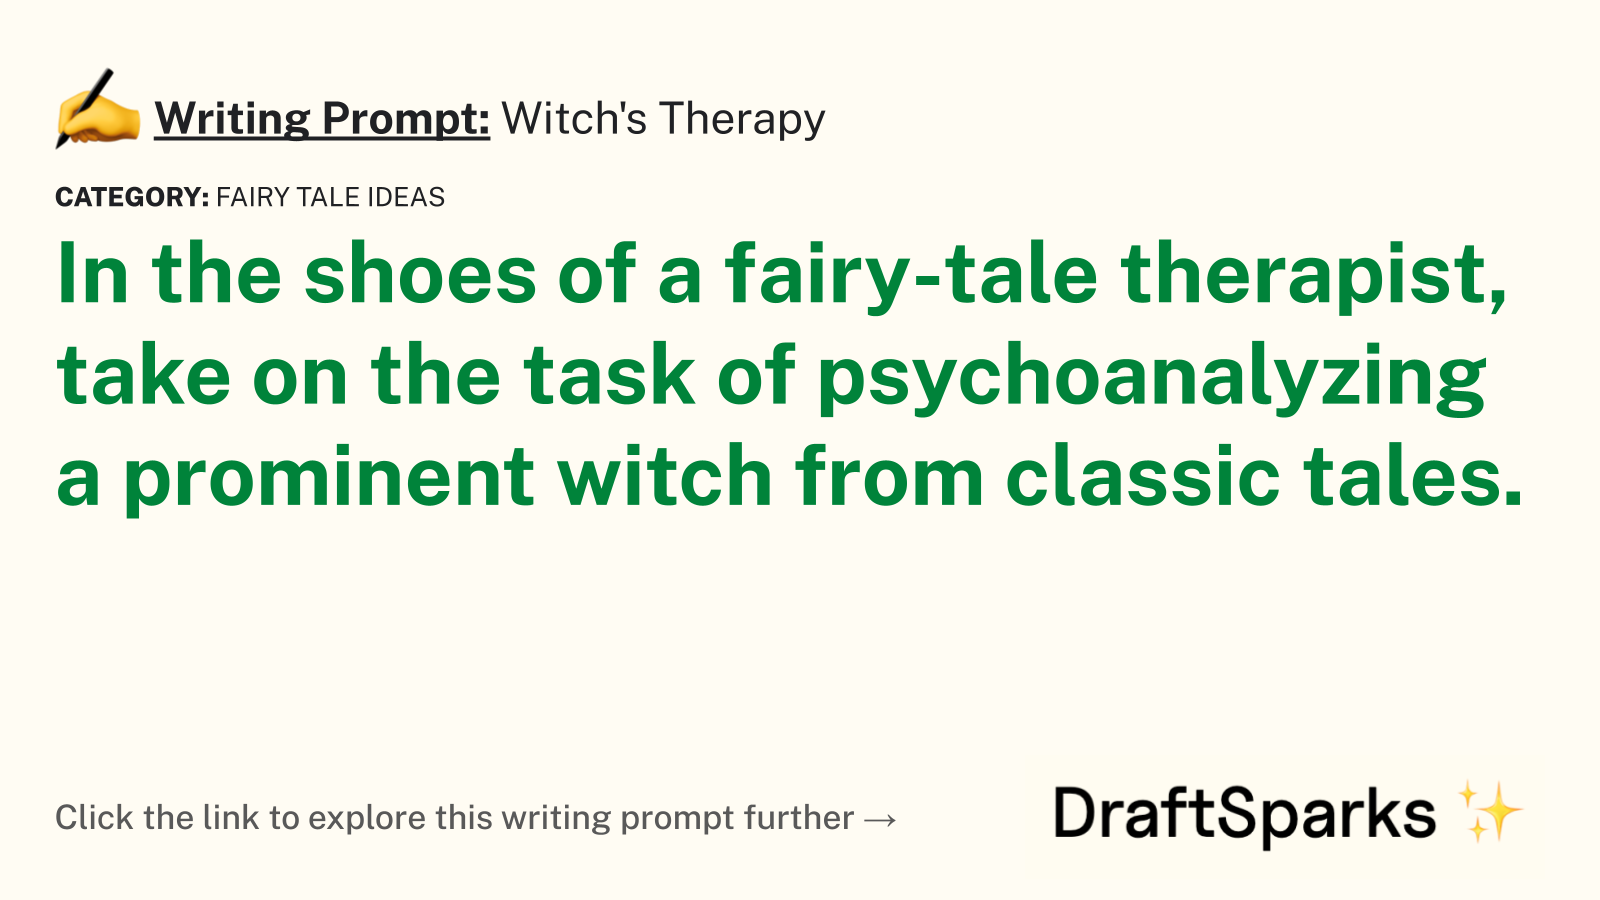 Witch’s Therapy